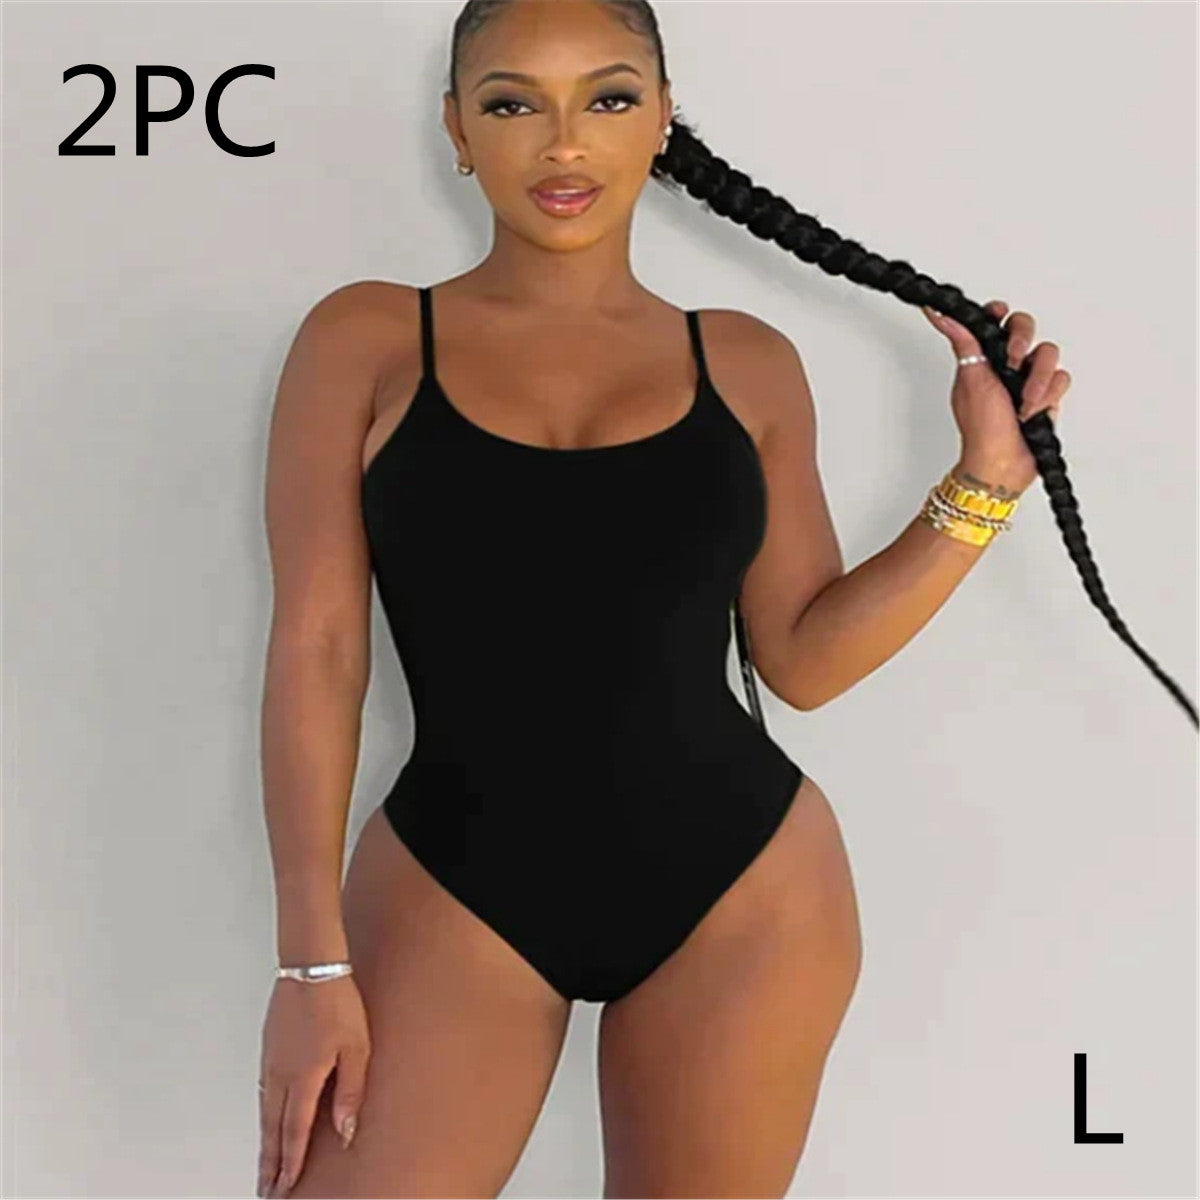 Swimsuit  | Sling Backless Plus Size Solid Color Triangle One-piece Swimsuit | Black Round Neck 2PC |  L| thecurvestory.myshopify.com